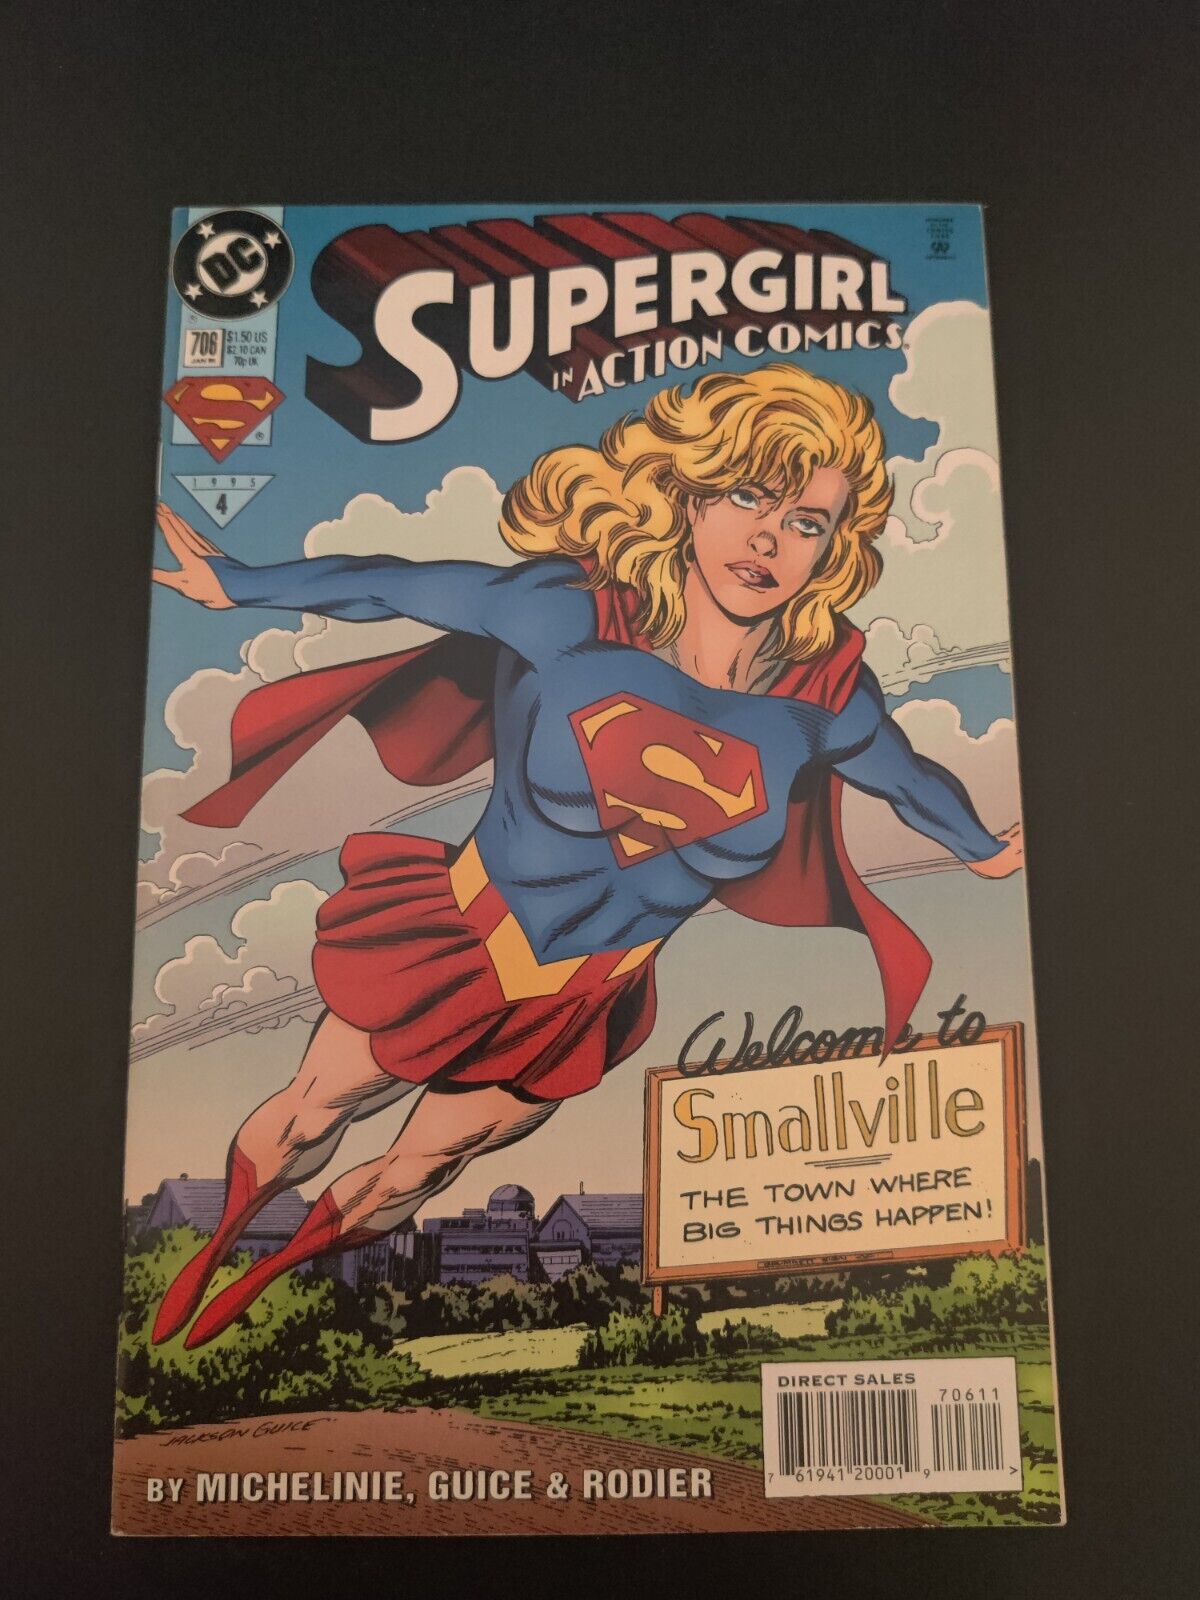 DC 1995 Supergirl In Action Comics Vol. 4 Issue 706 Comic Book